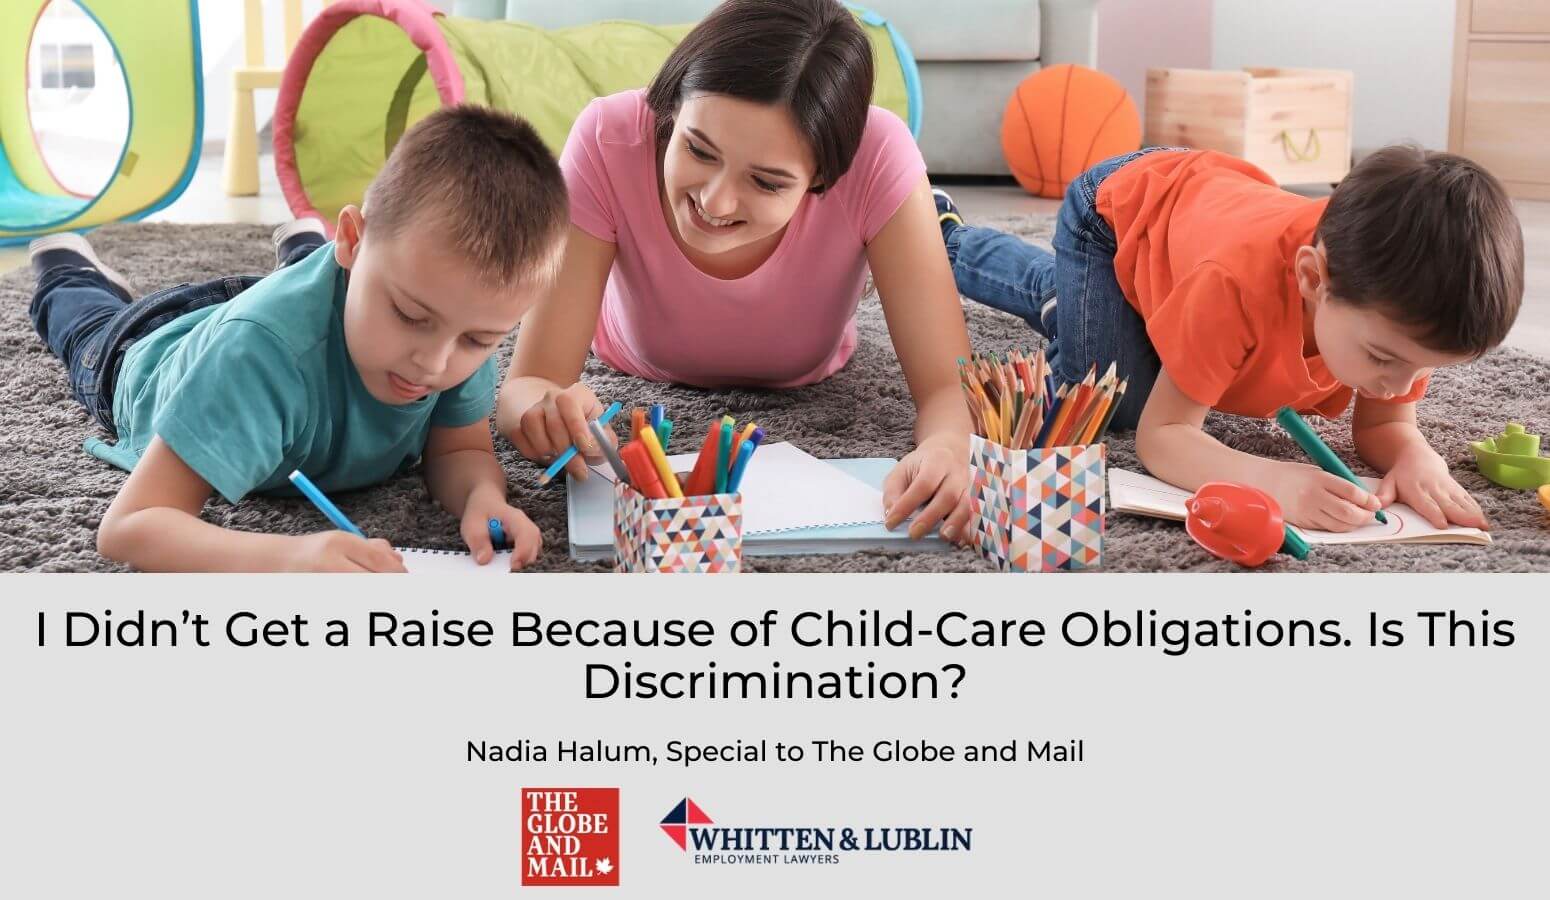 Featured image for “I Didn’t Get a Raise Because of Child-Care Obligations. Is This Discrimination?”